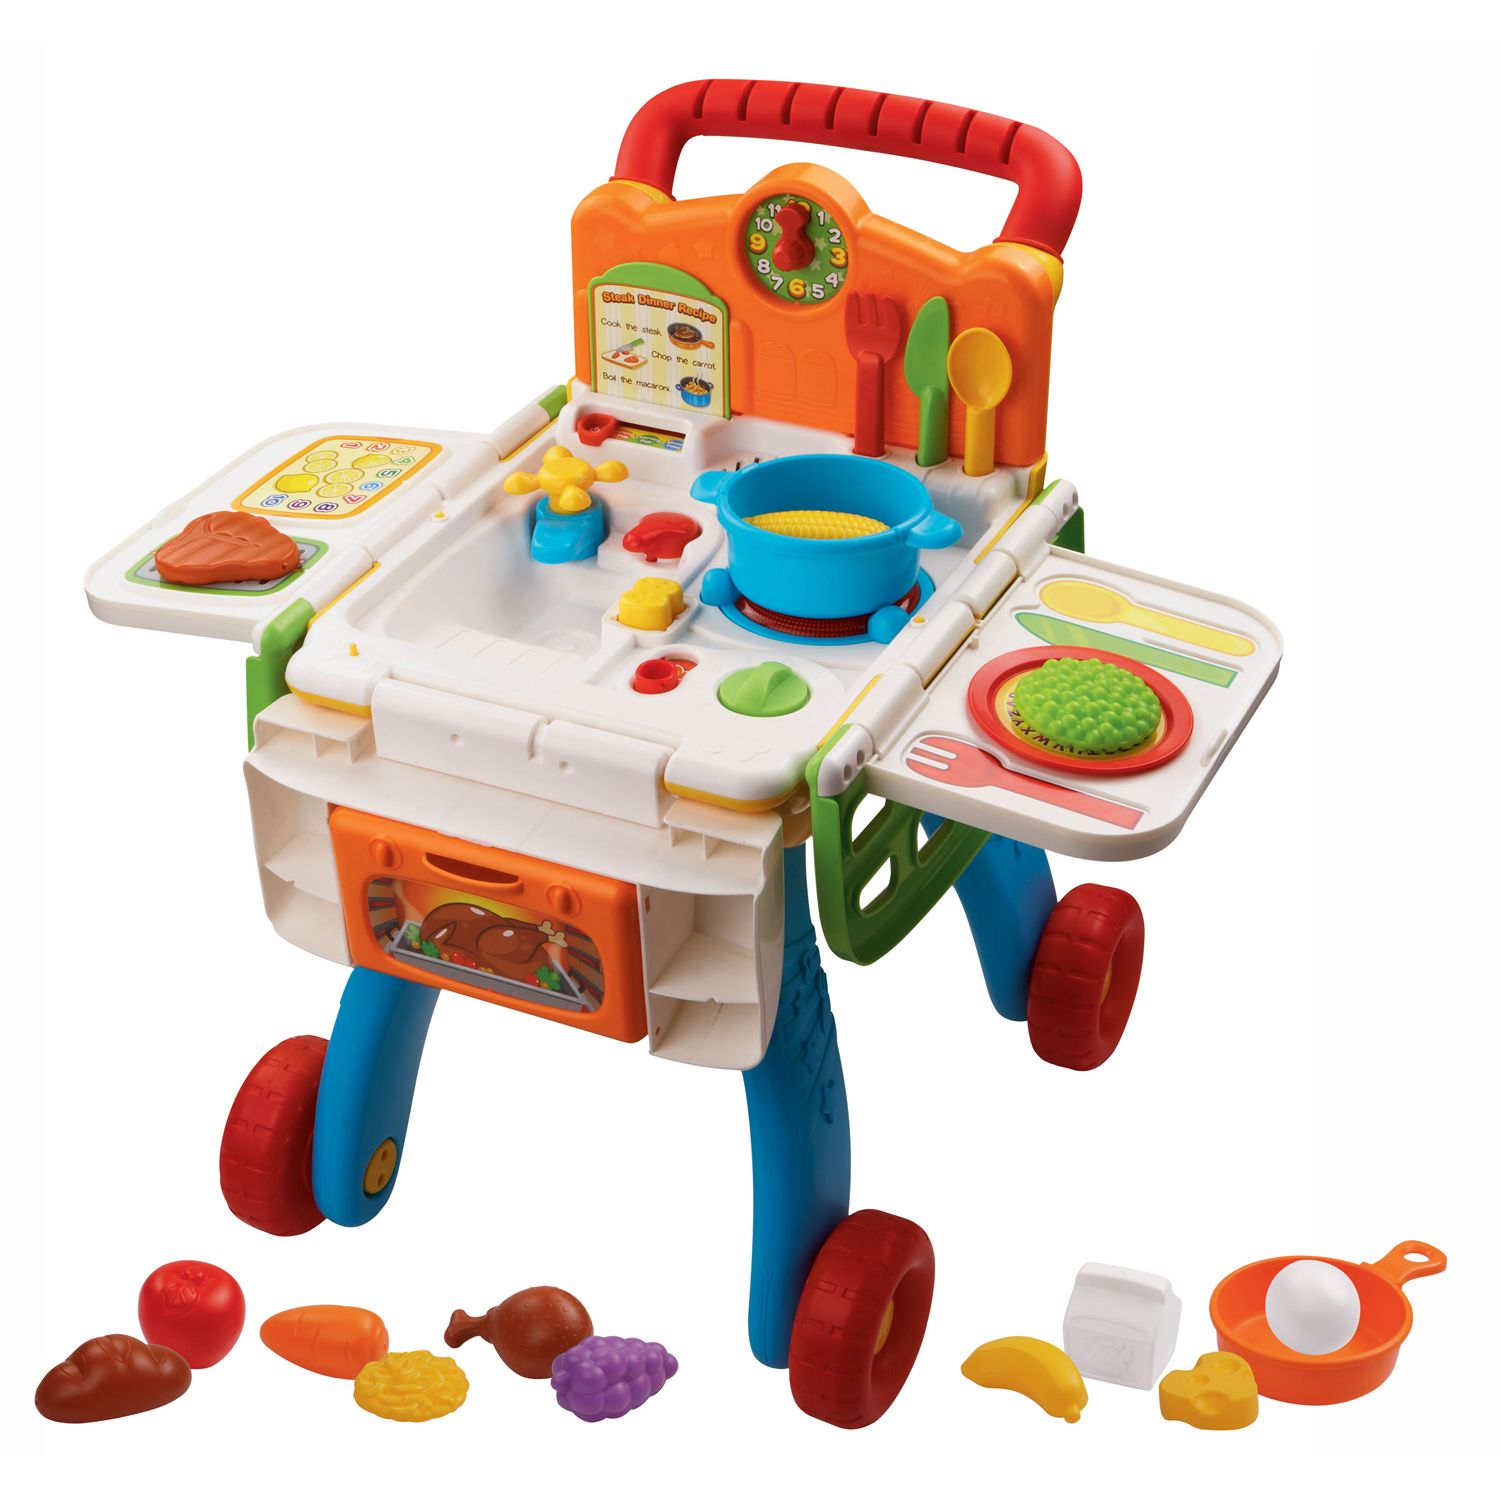 shop and cook kitchen play set